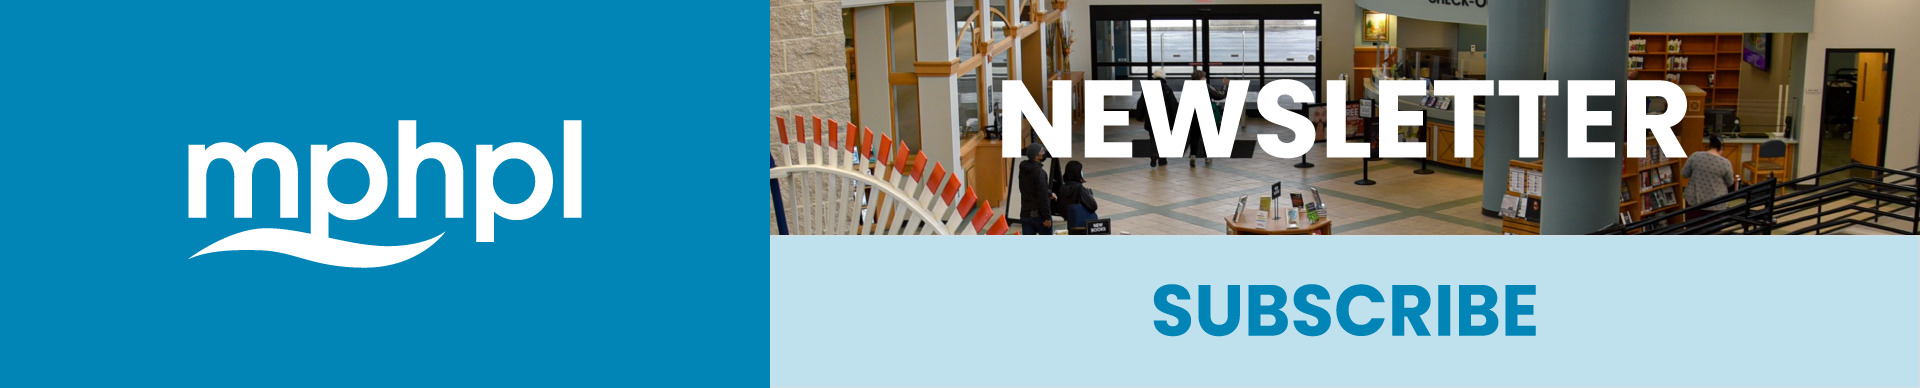 Stay Informed with What’s New at MPHPL by Signing Up for Our Monthly eNewsletter!